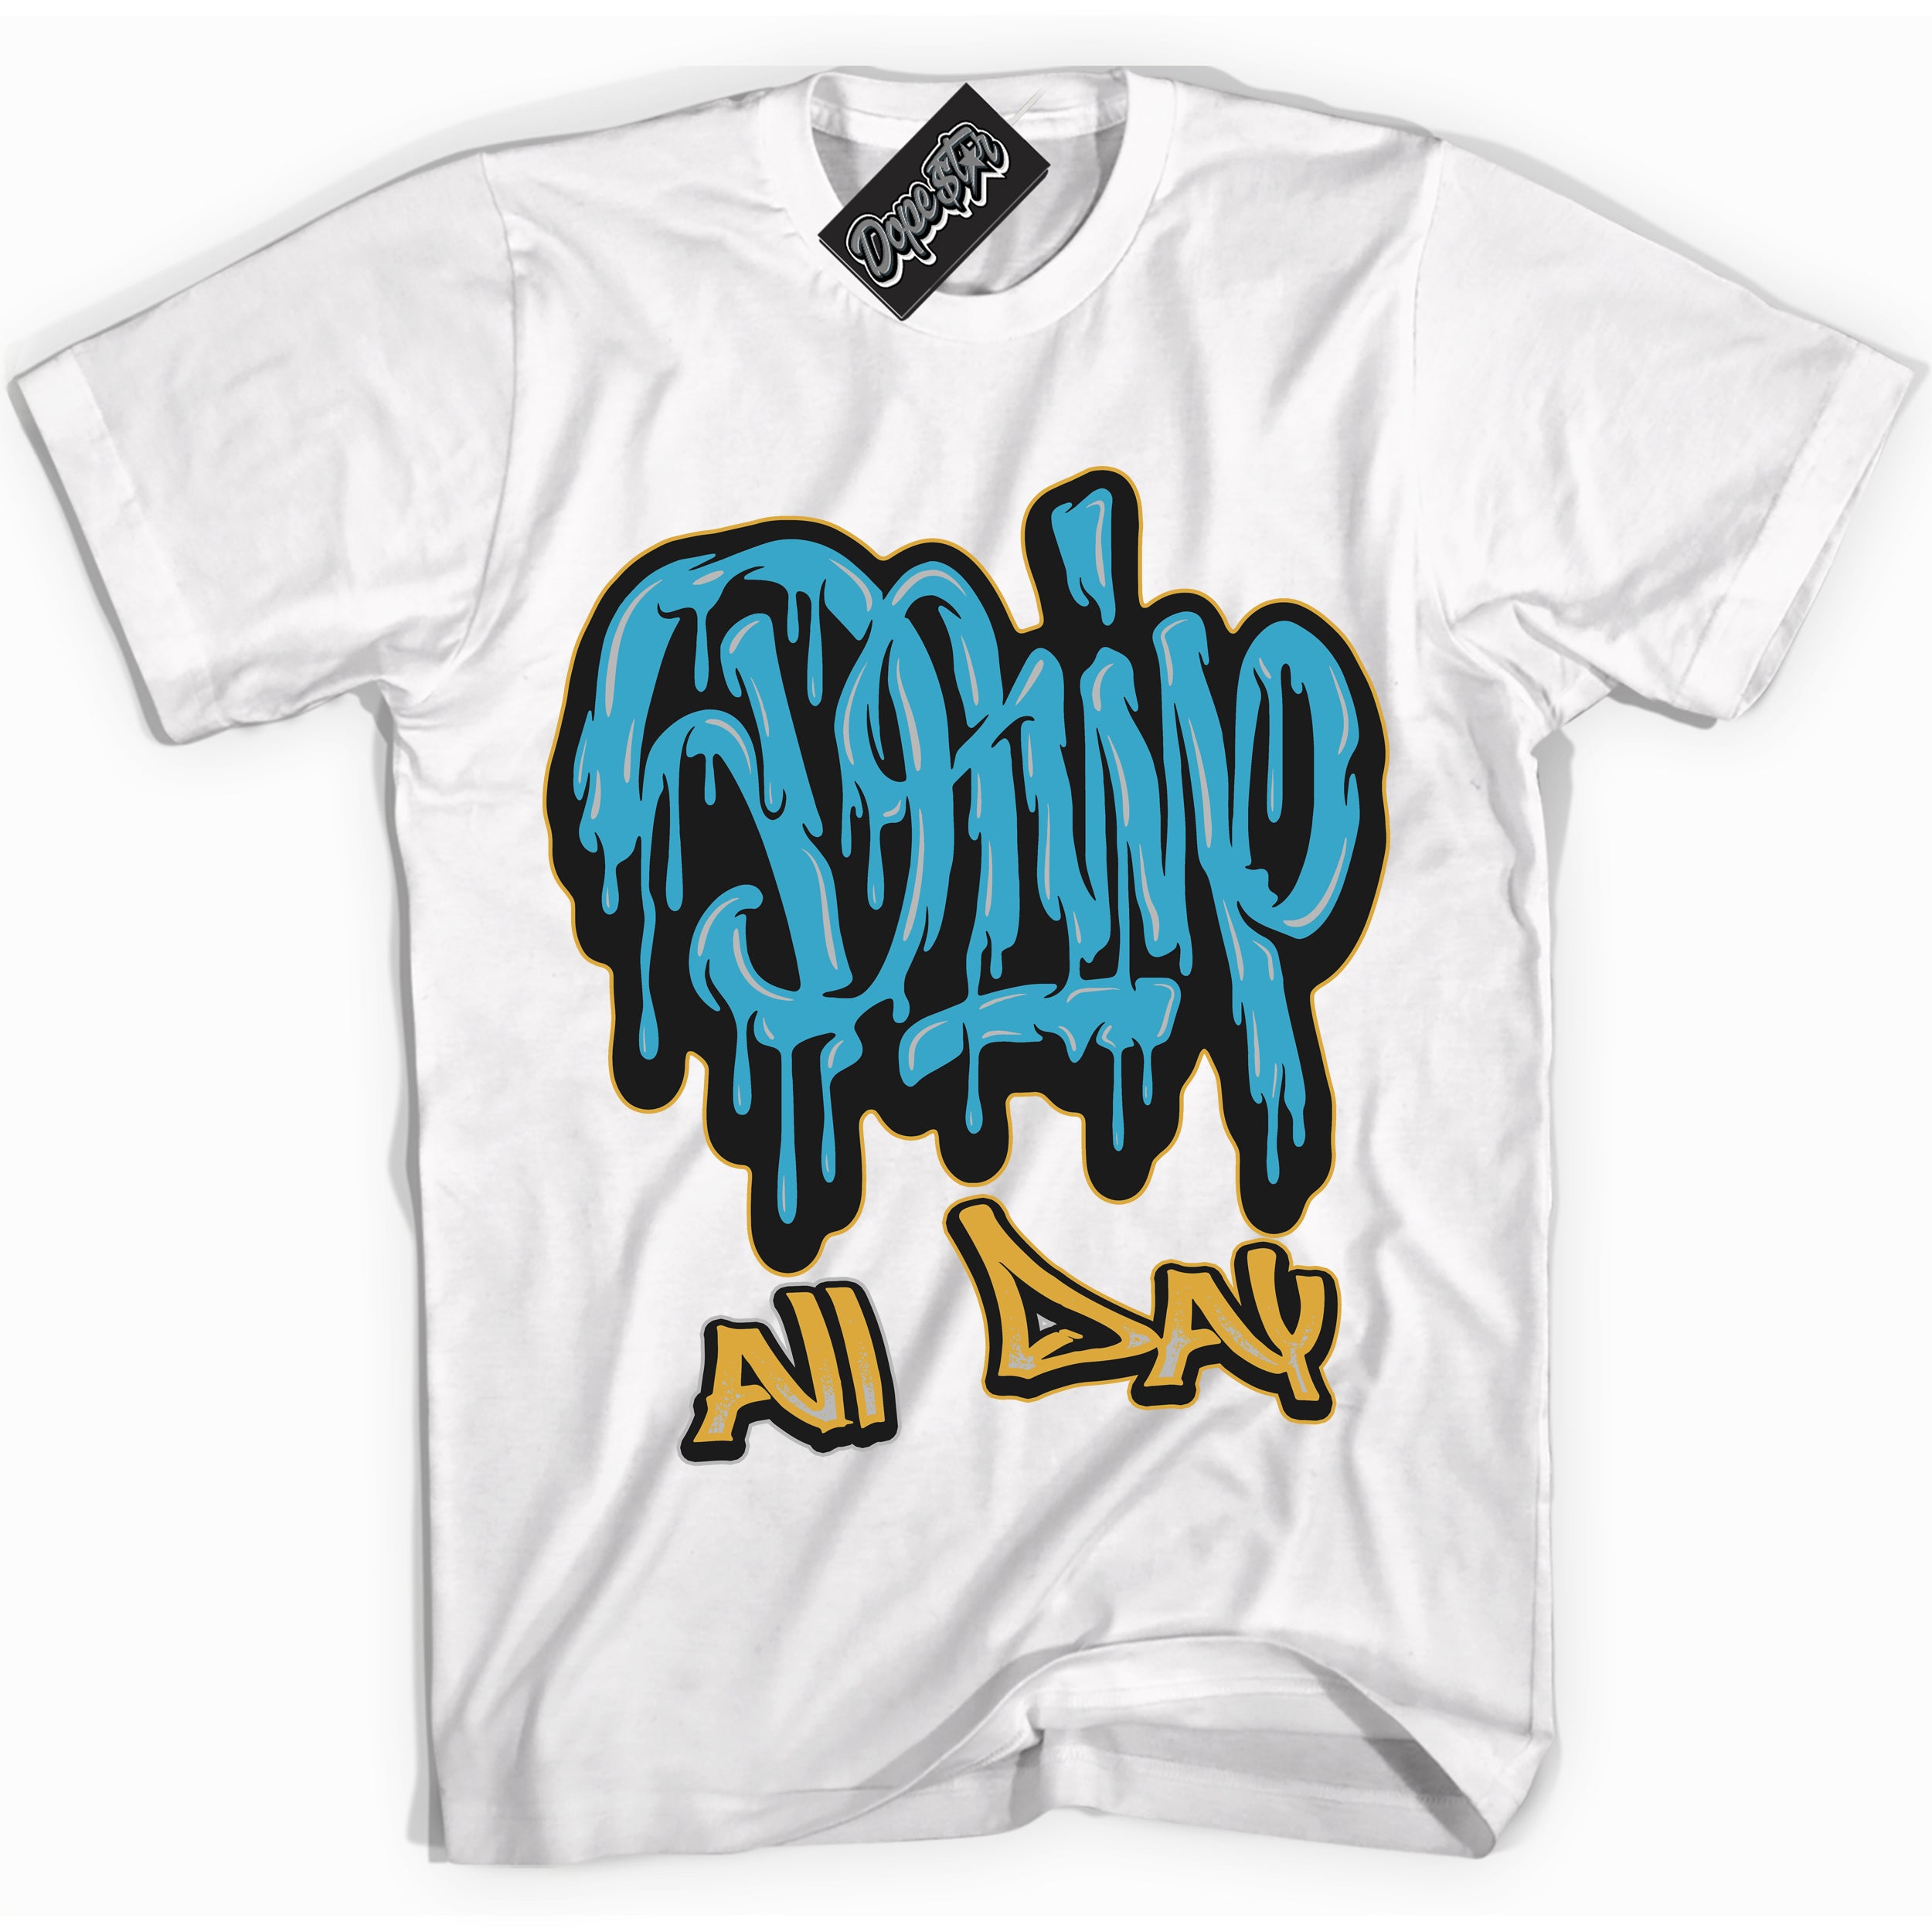 Cool White Shirt with “ Drip All Day” design that perfectly matches Aqua 5s Sneakers.